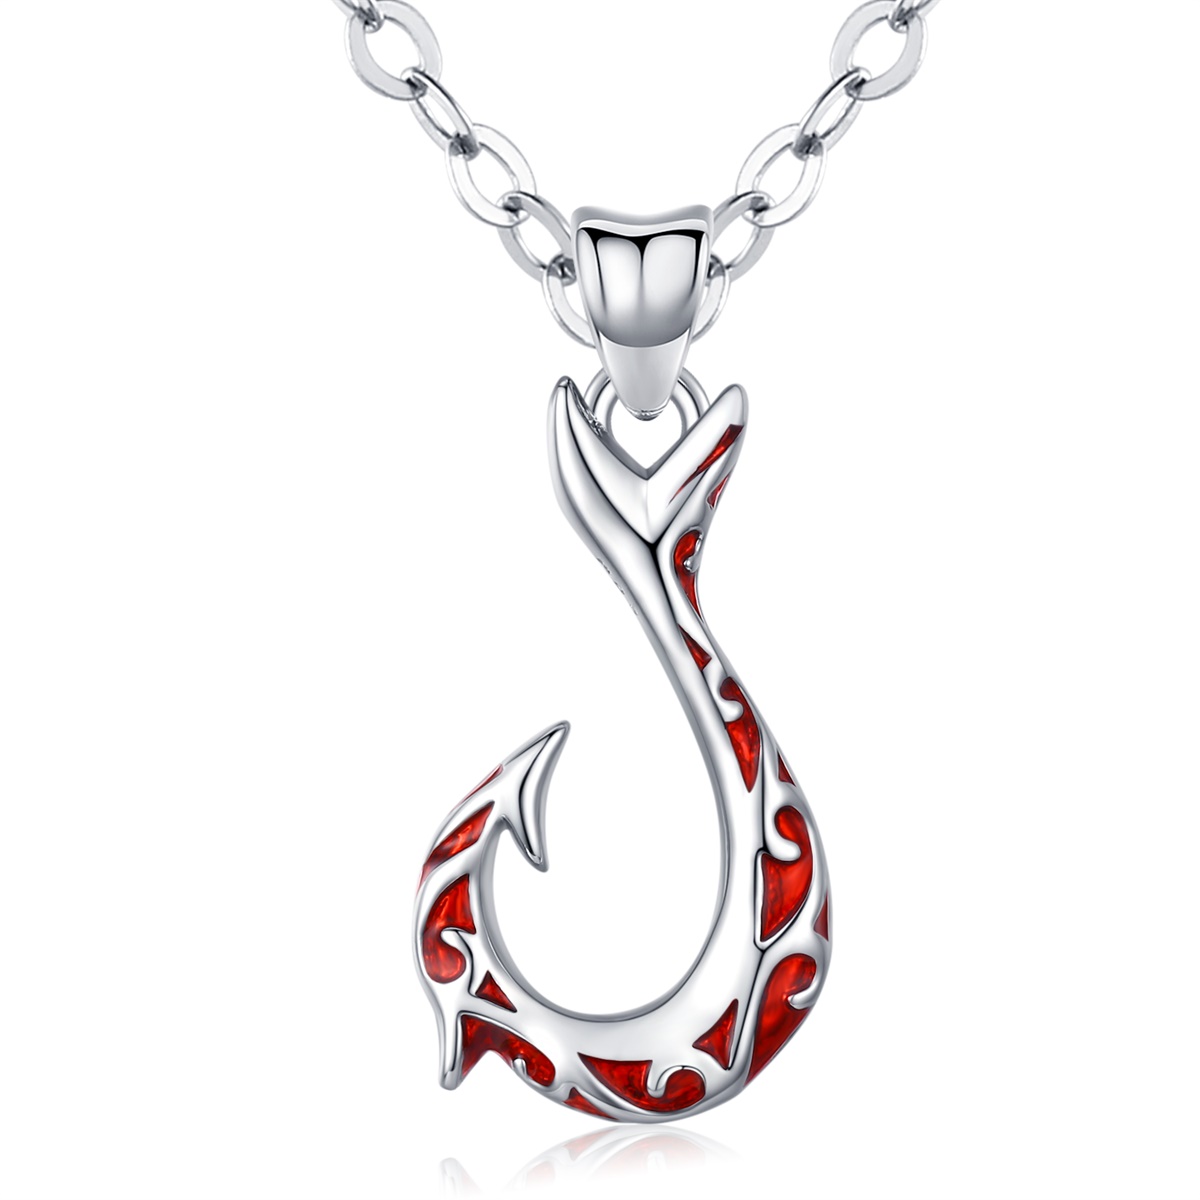 Merryshine Jewelry Copper Plating Rhodium Red Color Fishtail Mermaid Tail Fishhook Necklace